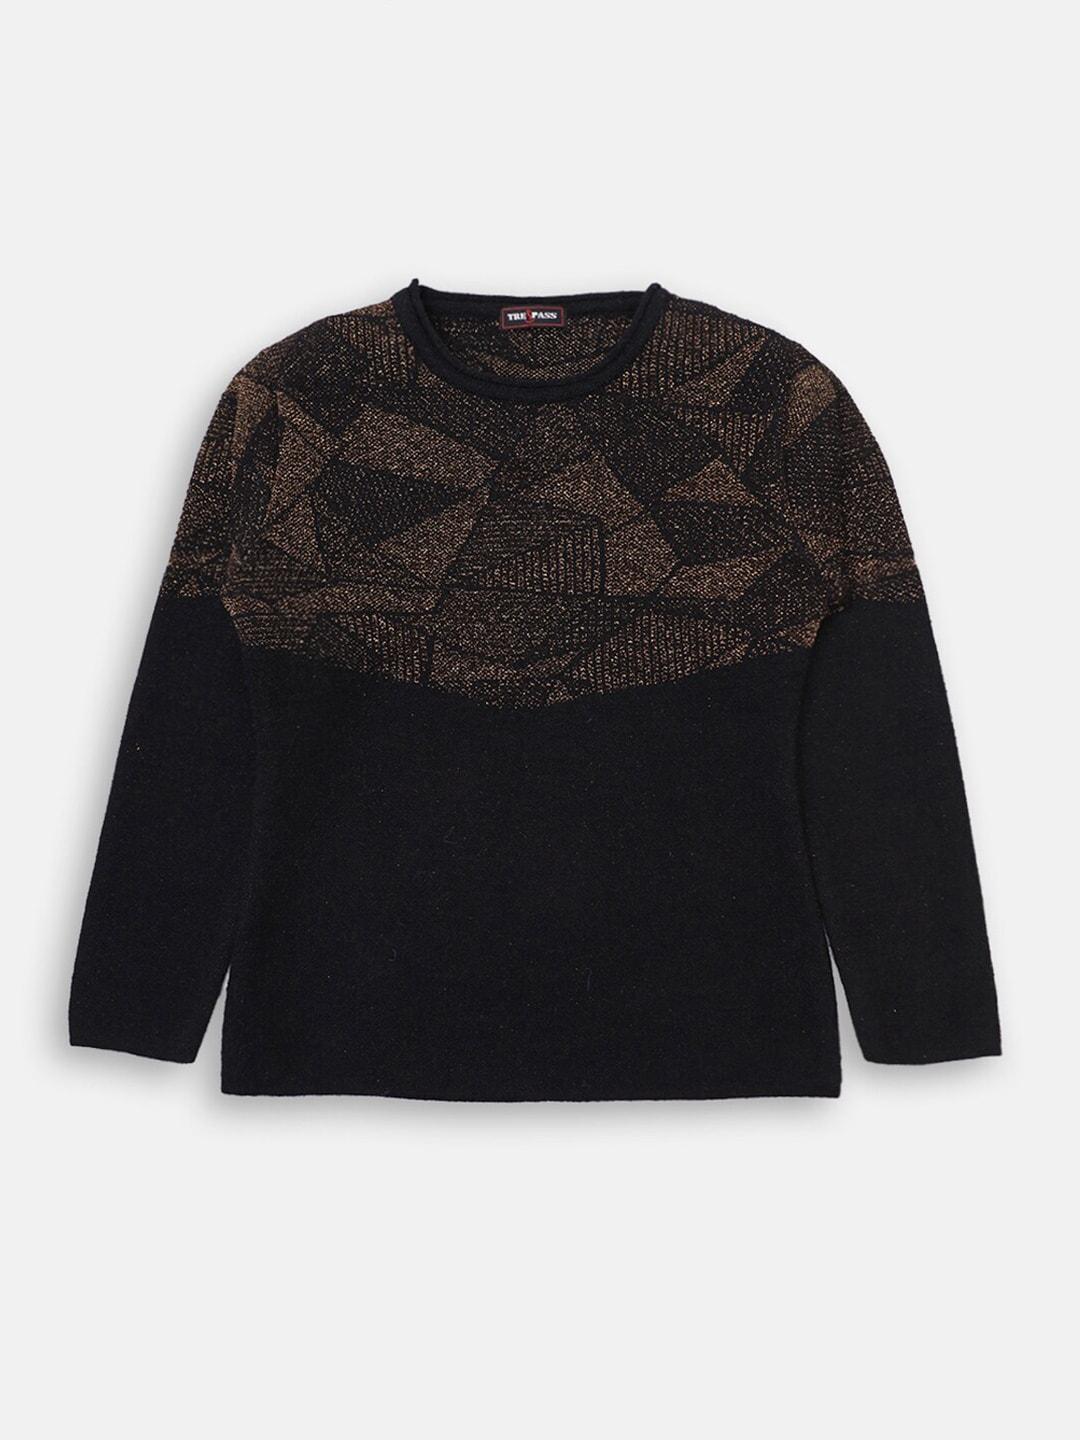 TRE&PASS Boys Black & Brown Printed Woolen Pullover